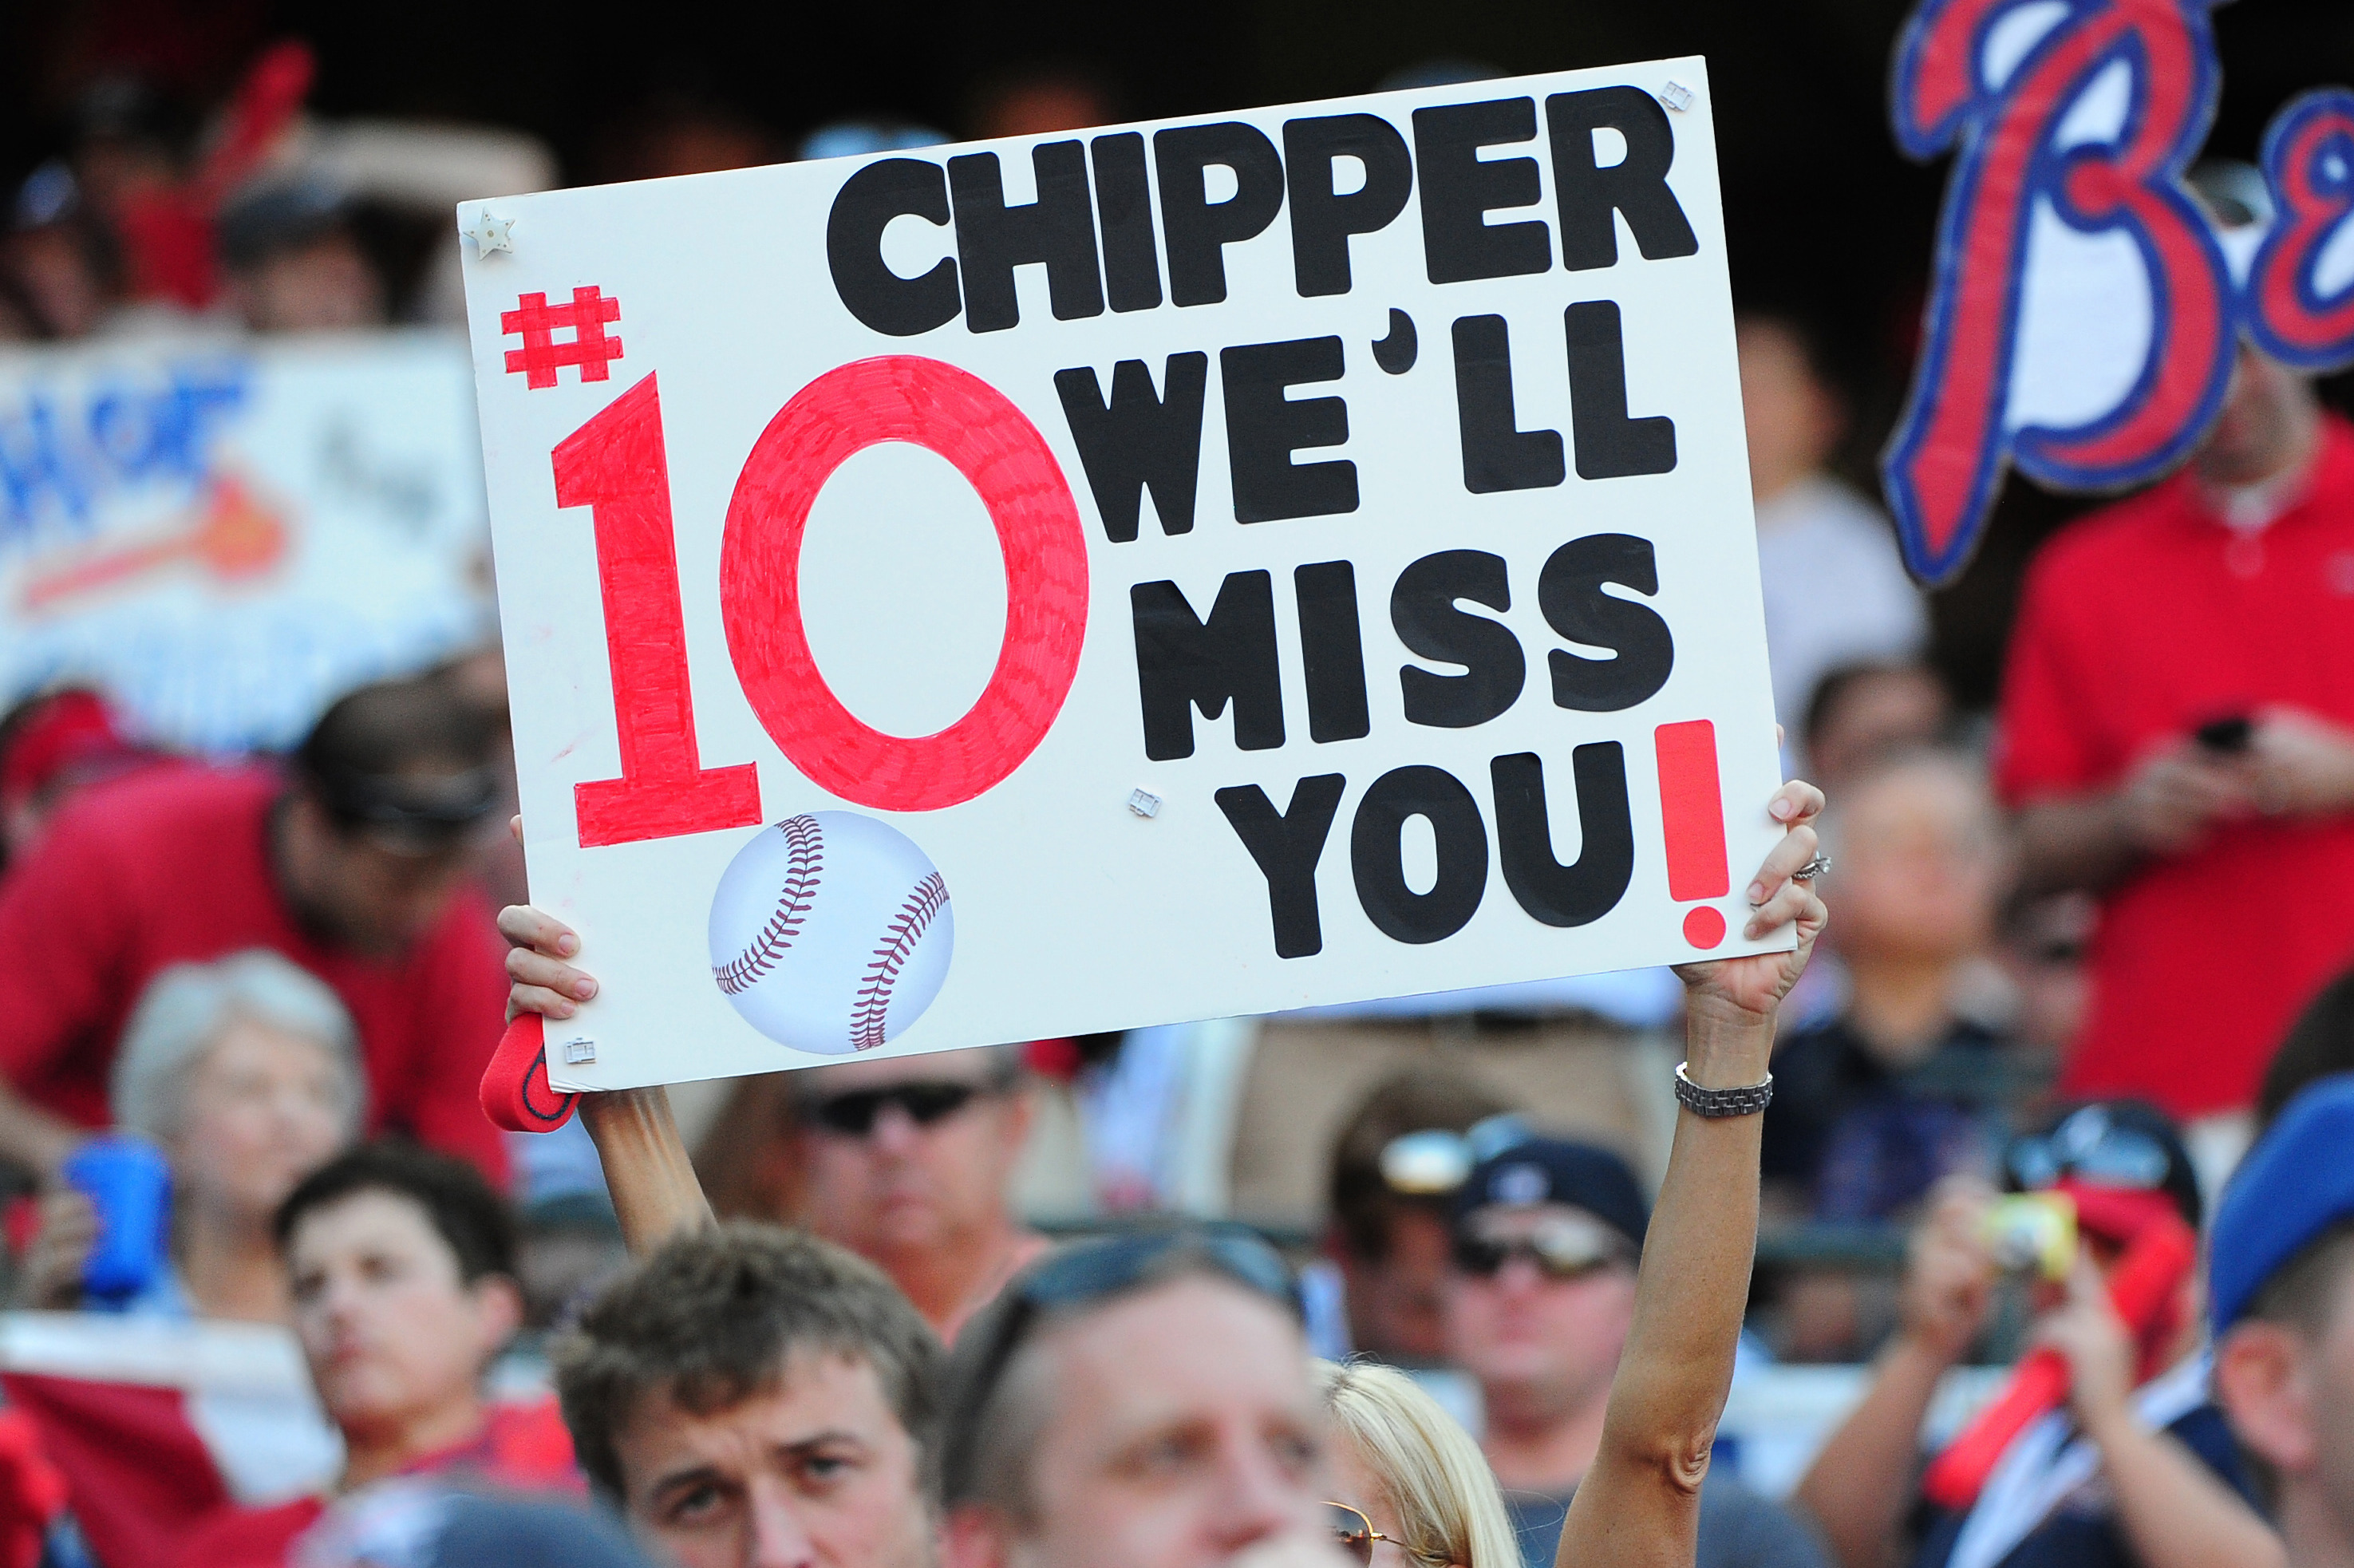 Why Freddie Freeman and Chipper Jones Will Lead the Braves to the Playoffs, News, Scores, Highlights, Stats, and Rumors